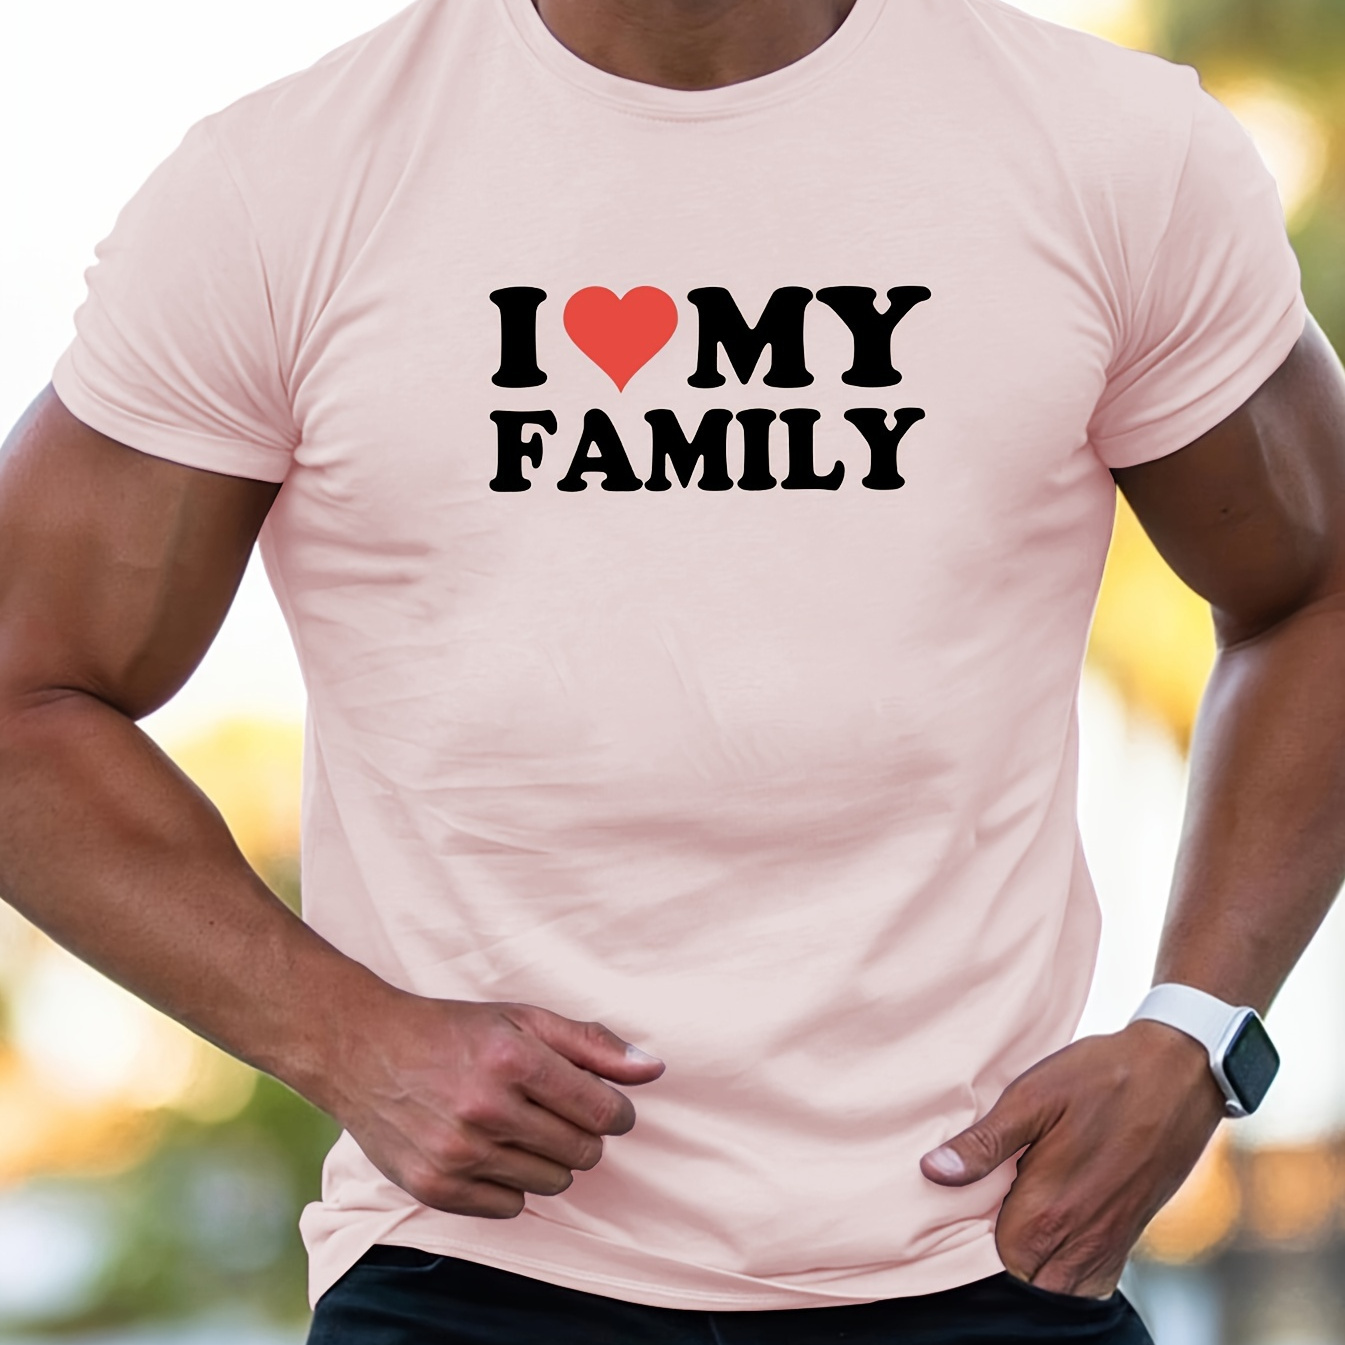 

I Love My Family Print Tees For Men, Casual Quick Drying Breathable T-shirt, Short Sleeve T-shirt For Running Training